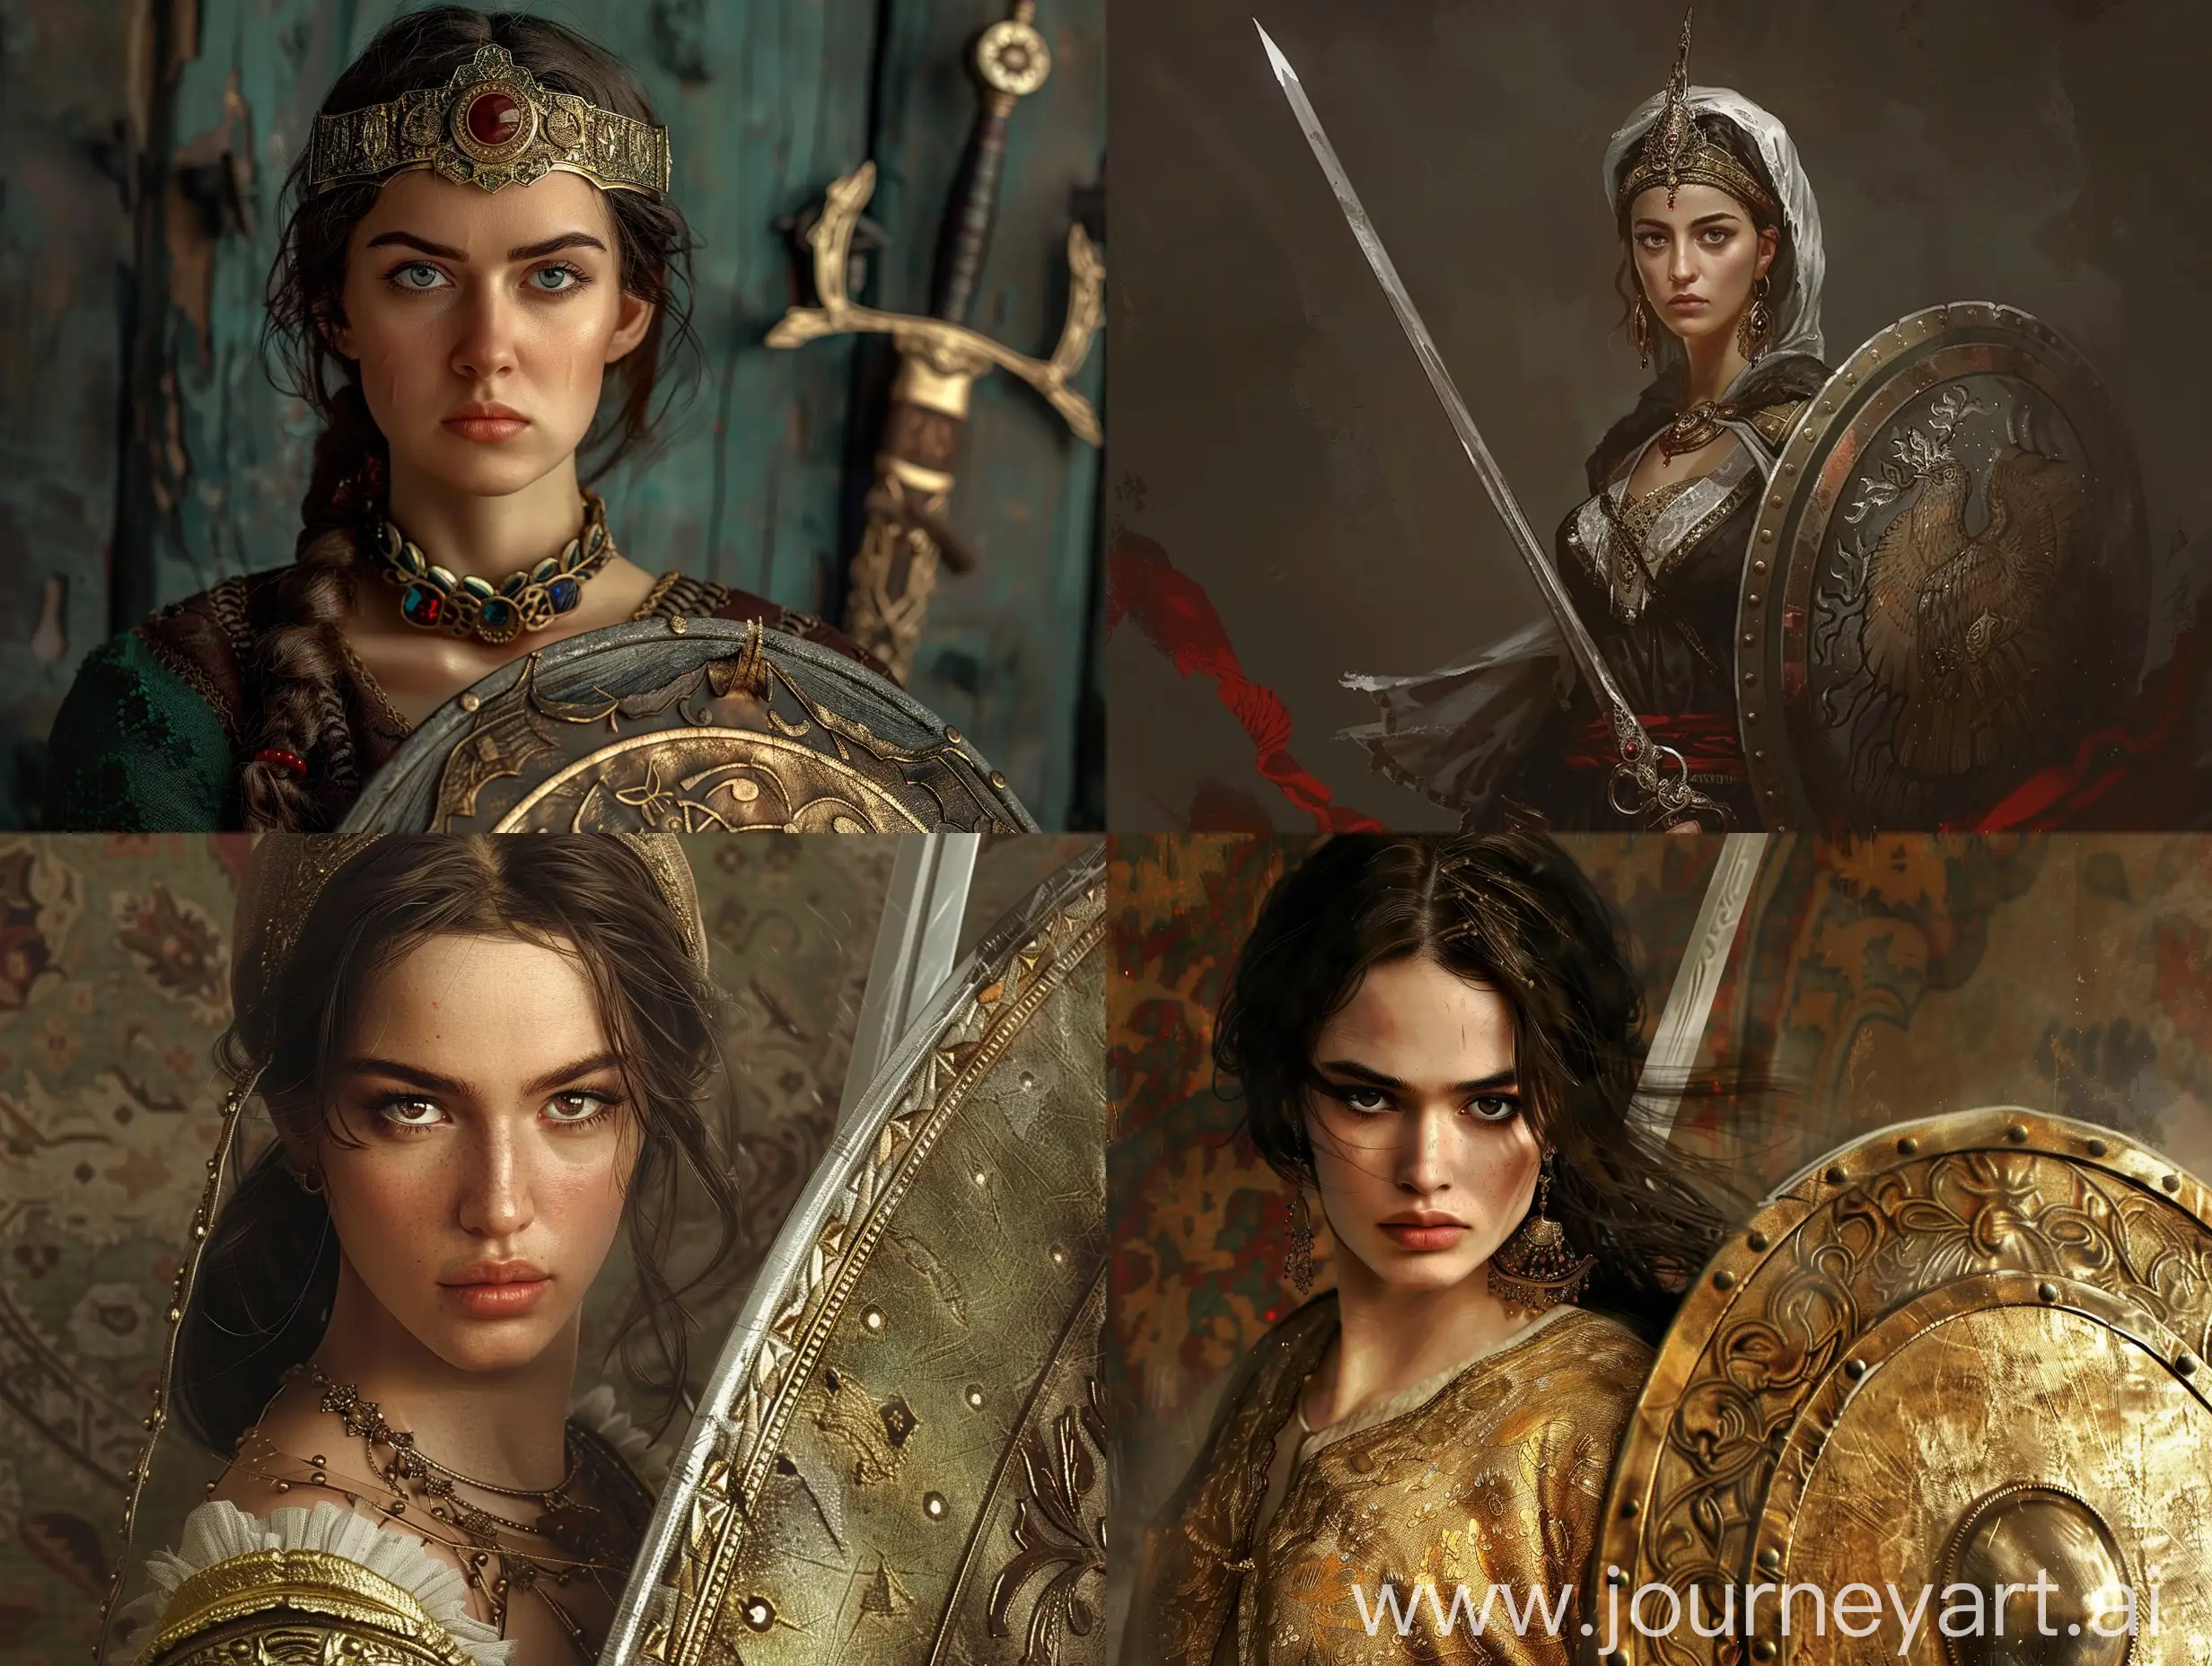 Medieval-Ottoman-Turkish-Warrior-Beauty-Women-with-Realistic-Sword-and-Shield